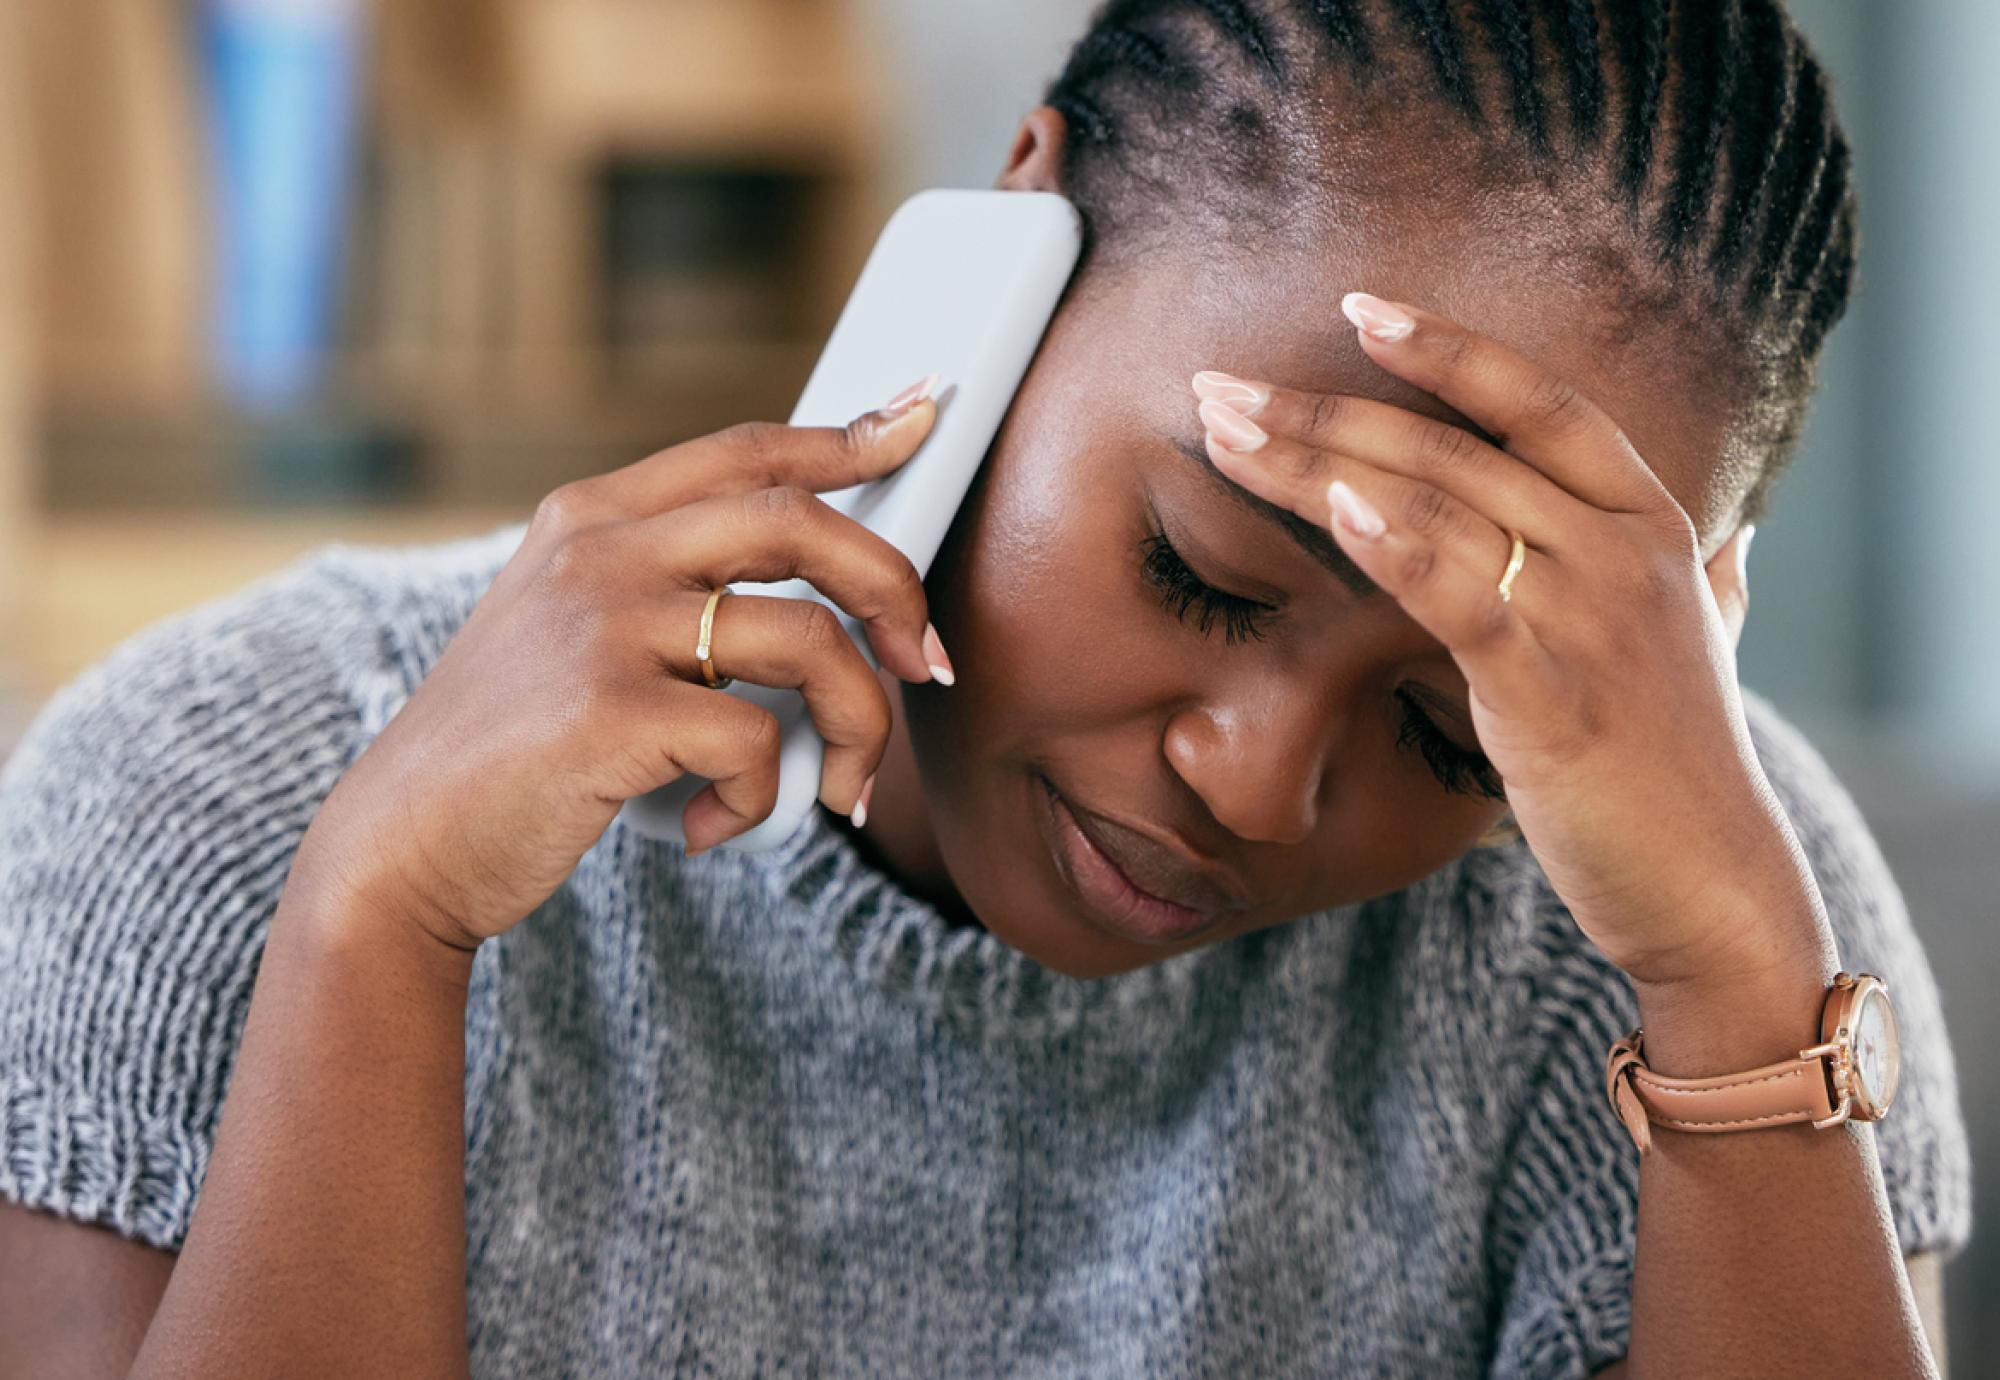 Woman struggling with mental health on phone call